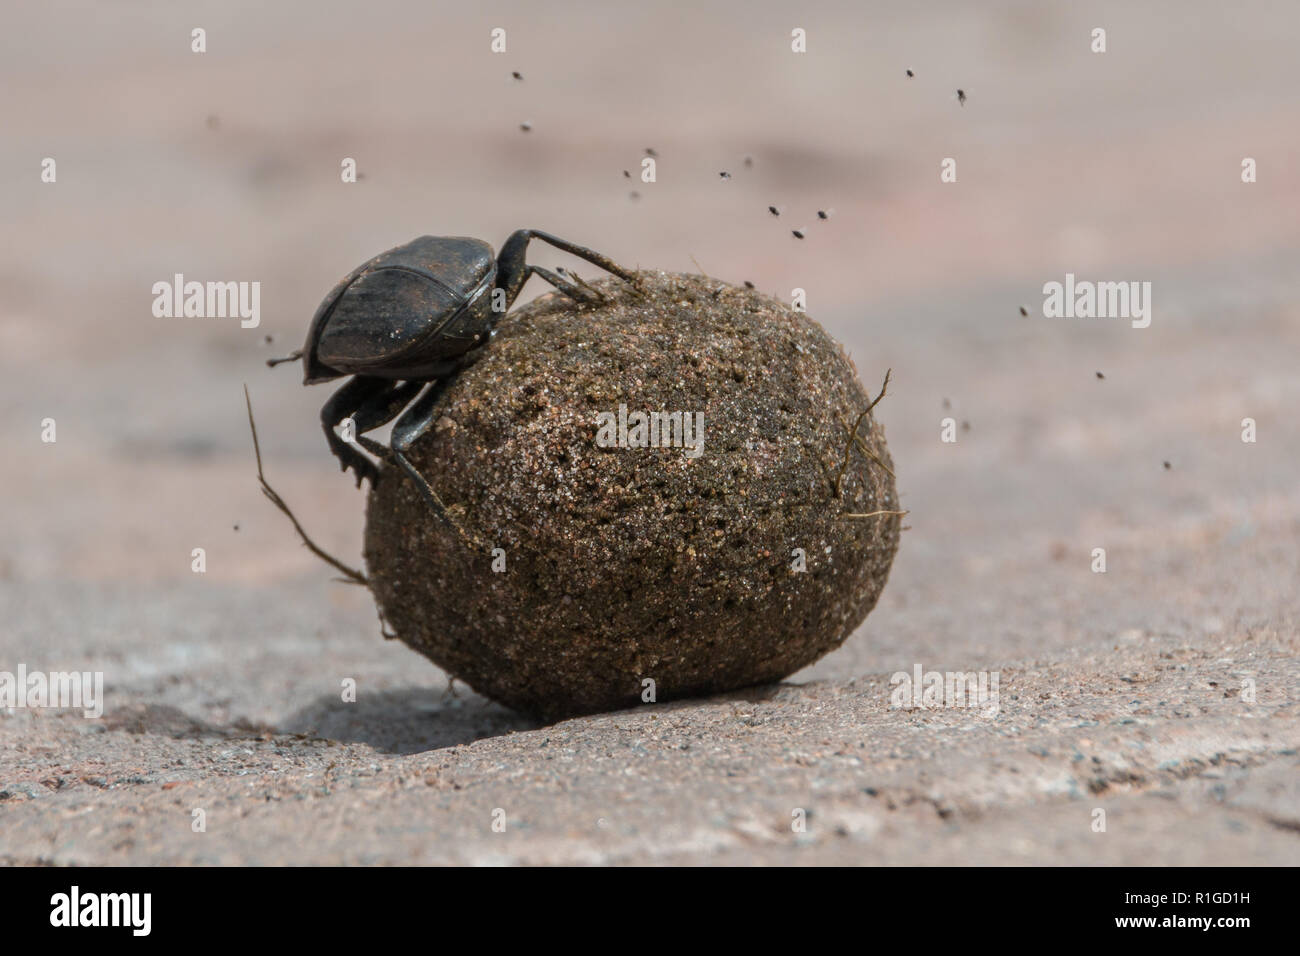 One dung beetle sitting on it's dung ball, close up view Stock Photo